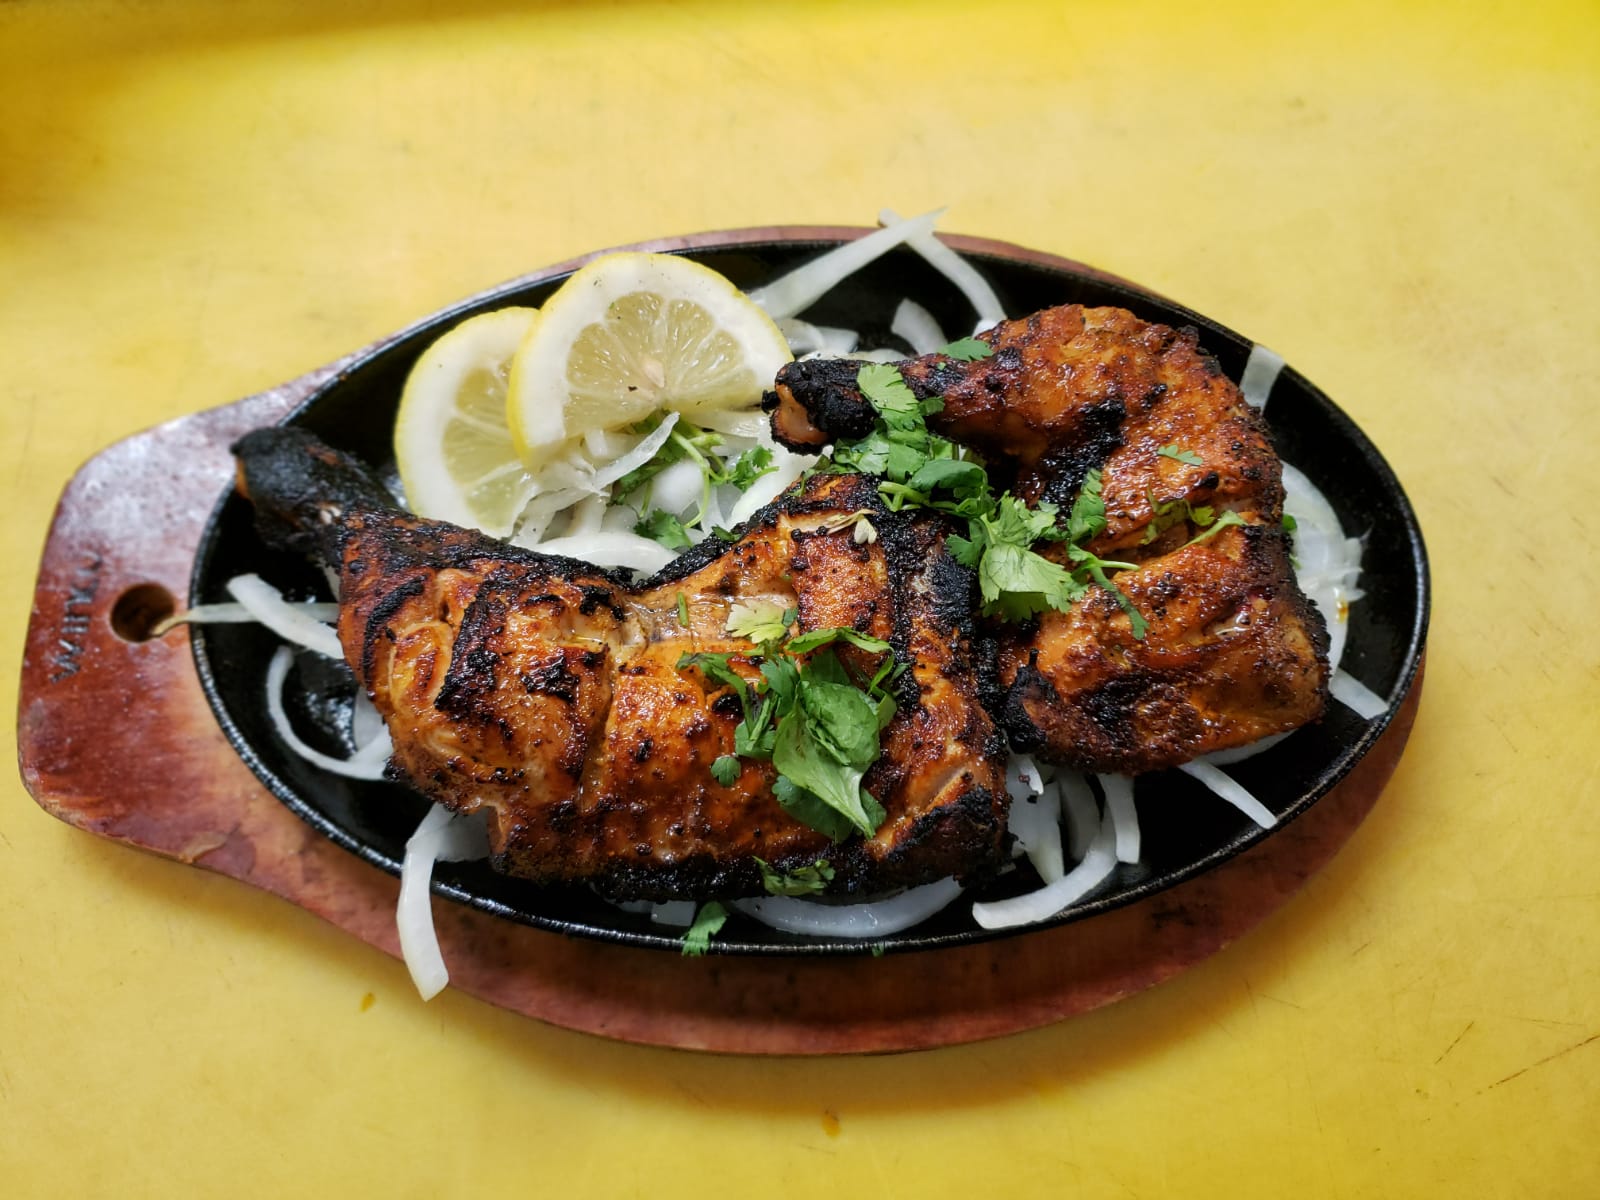 Best Halal Restaurants: Habits To Adapt When Dining There